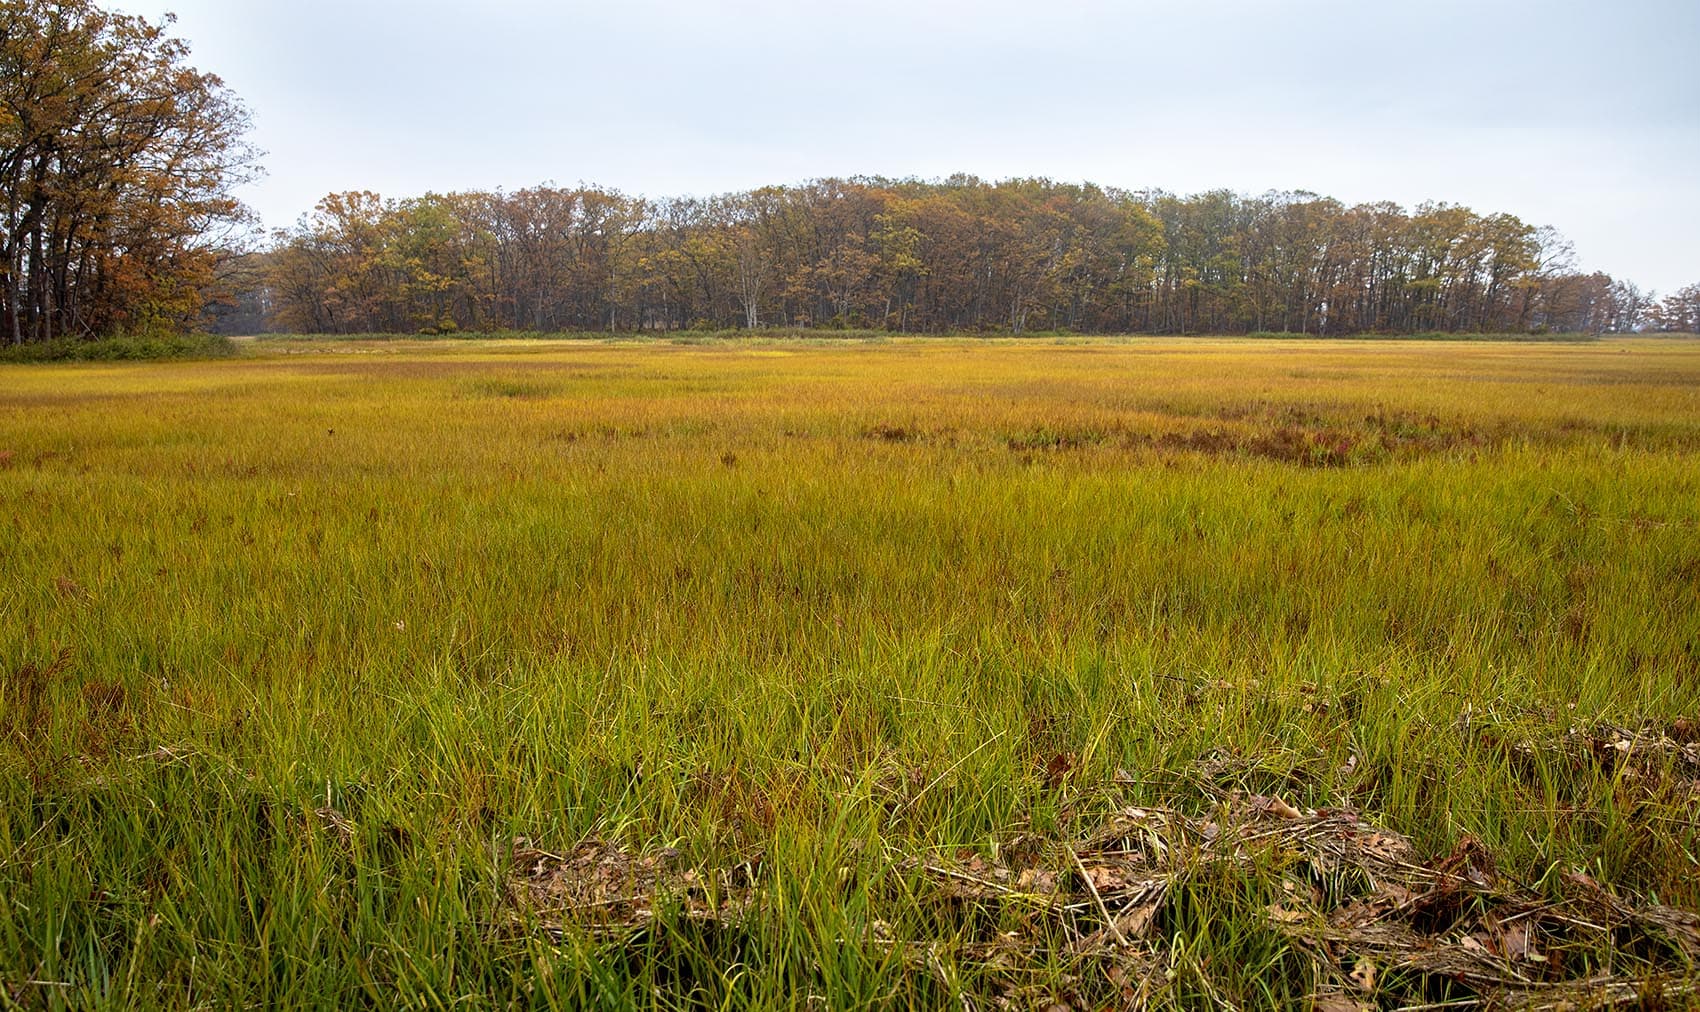 The marshes at Mass. Audubon's Rough Meadows Wildlife Sanctuary in Rowley. (Robin Lubbock/WBUR)